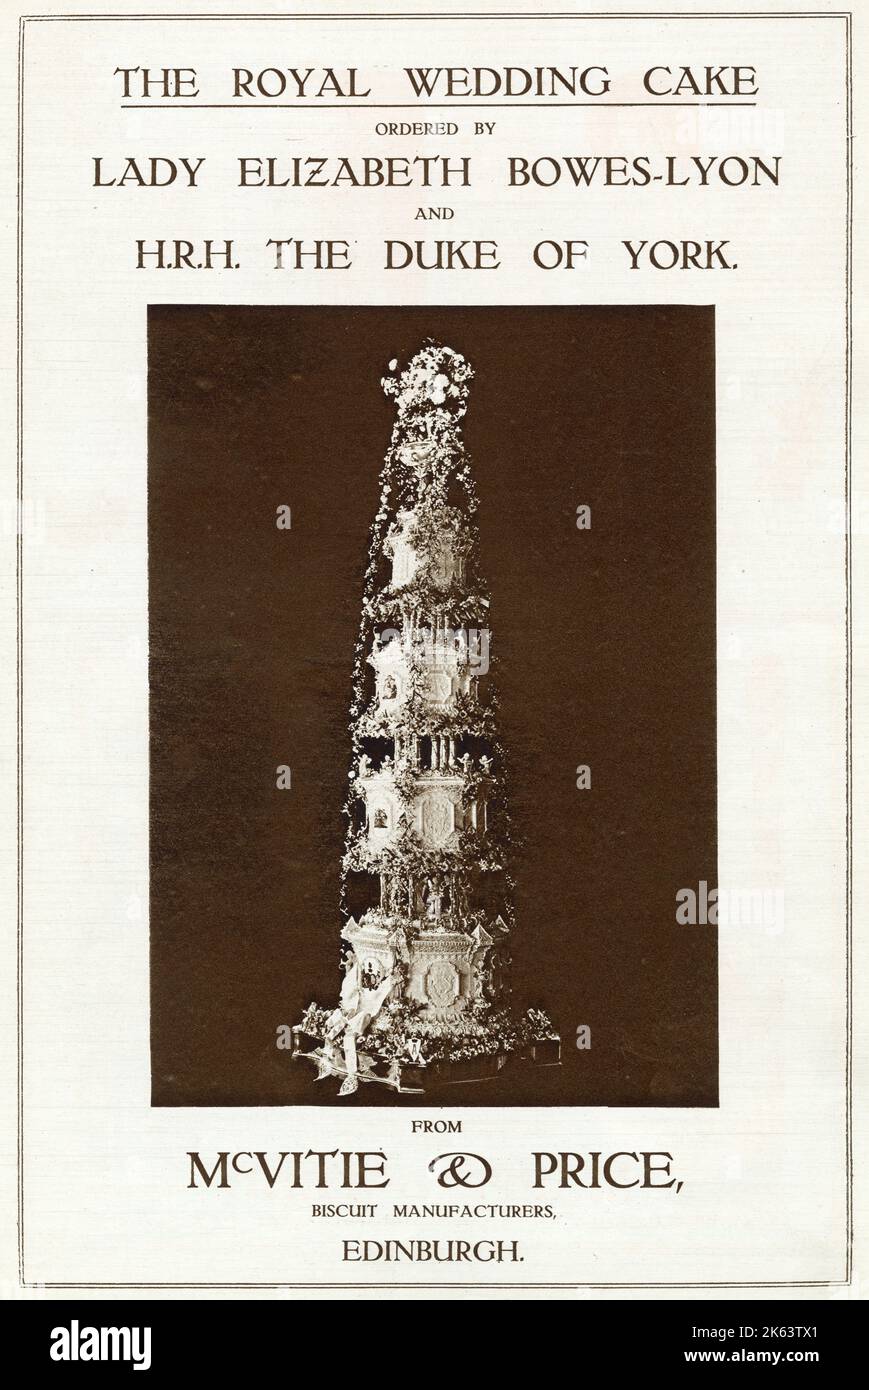 Advertisement for the 10ft high royal wedding of the Duke of York to Lady Elizabeth Bowes-Lyon, placed by McVitie and Price of Edinburgh, who strangely, call themselves biscuit makers. Stock Photo